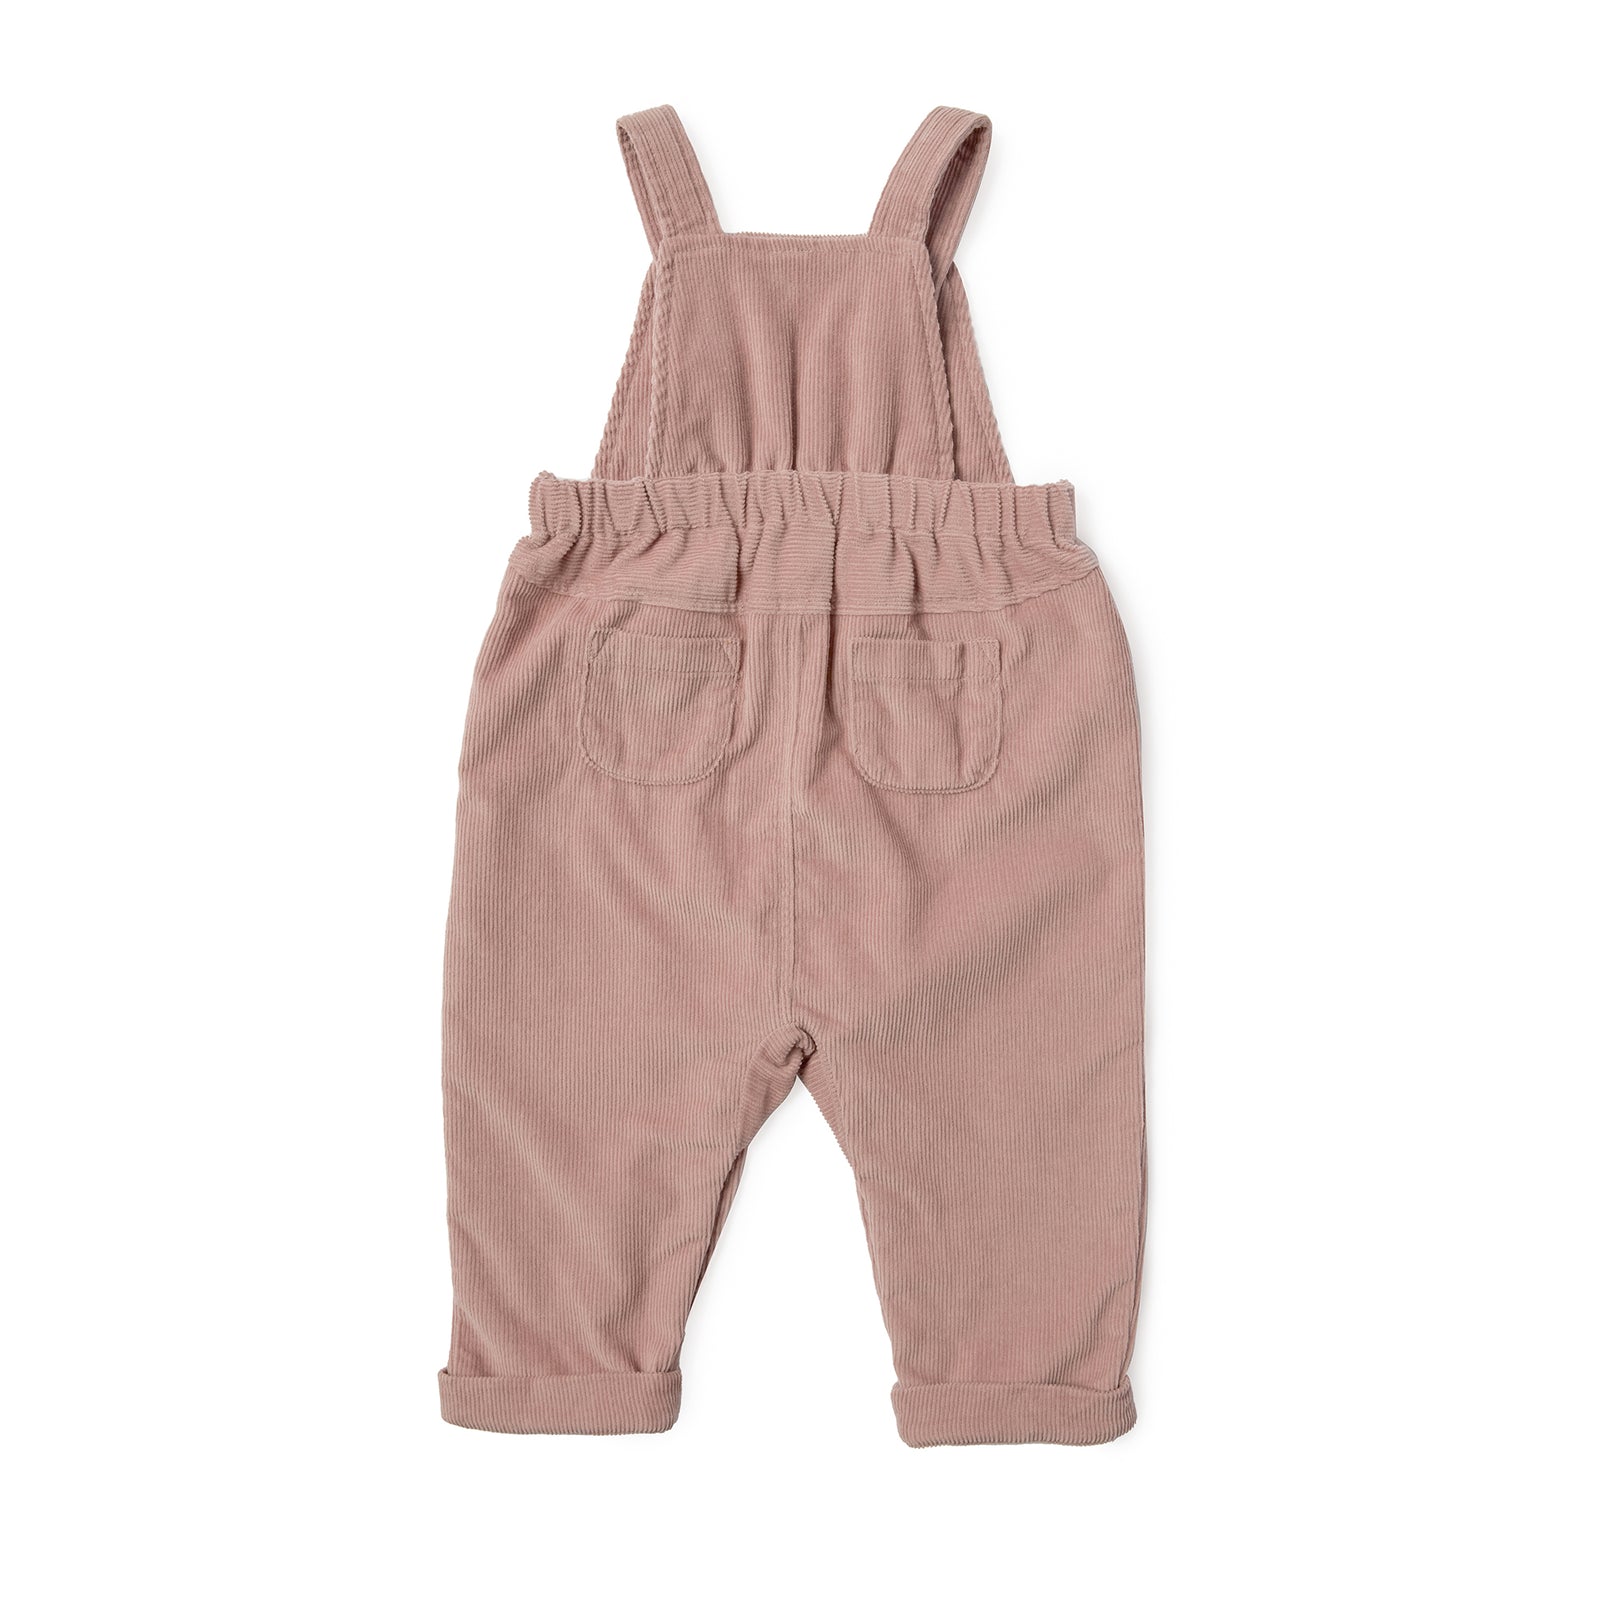 Corduroy Overall Overall Pehr Canada   